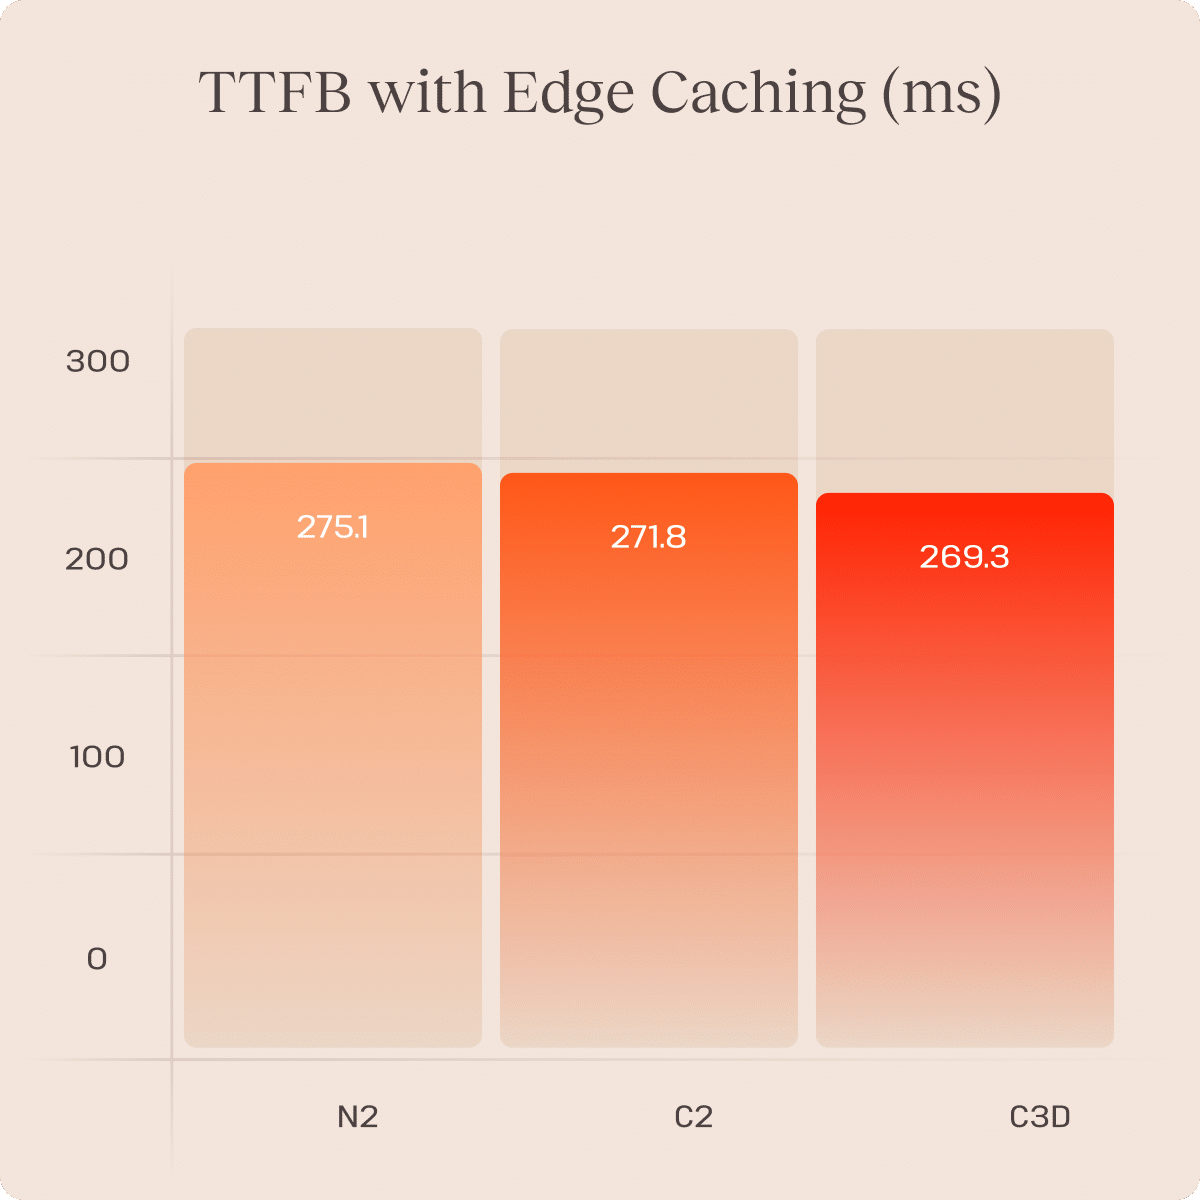 A chart showing time-to-first-byte on C3D, C2, and N2 VMs when all are supported by edge caching.